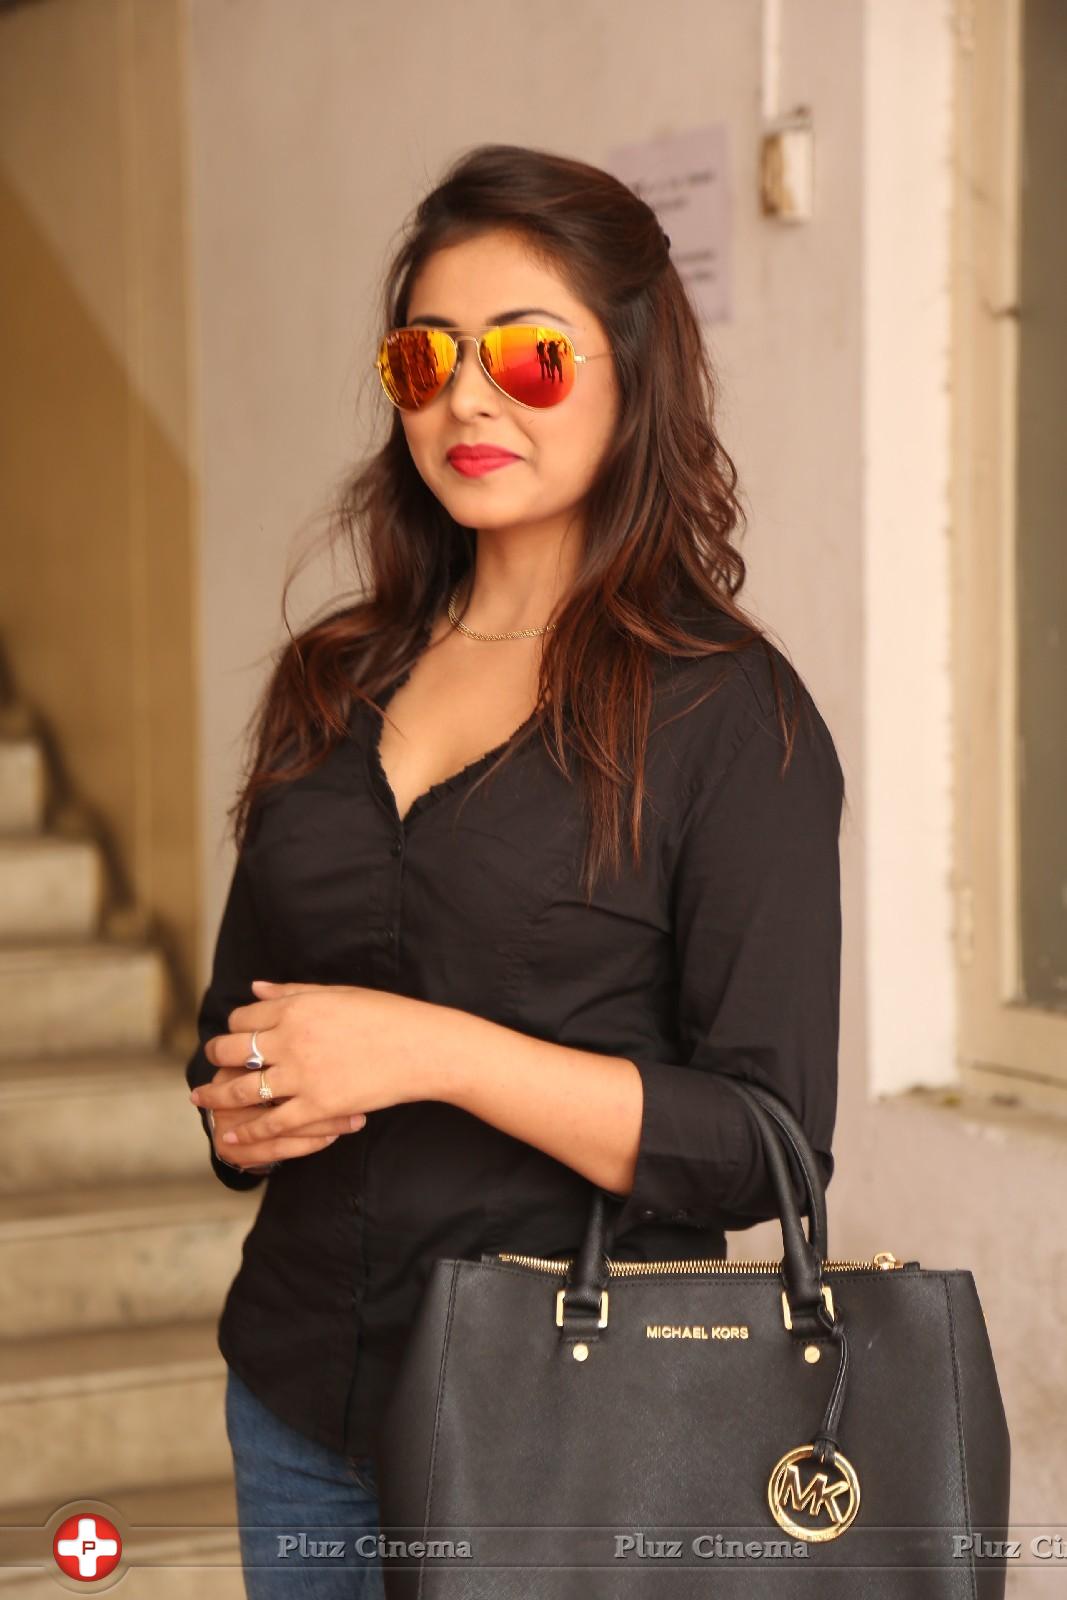 Madhu Shalini at Maa Elections Polling Photos | Picture 1004603